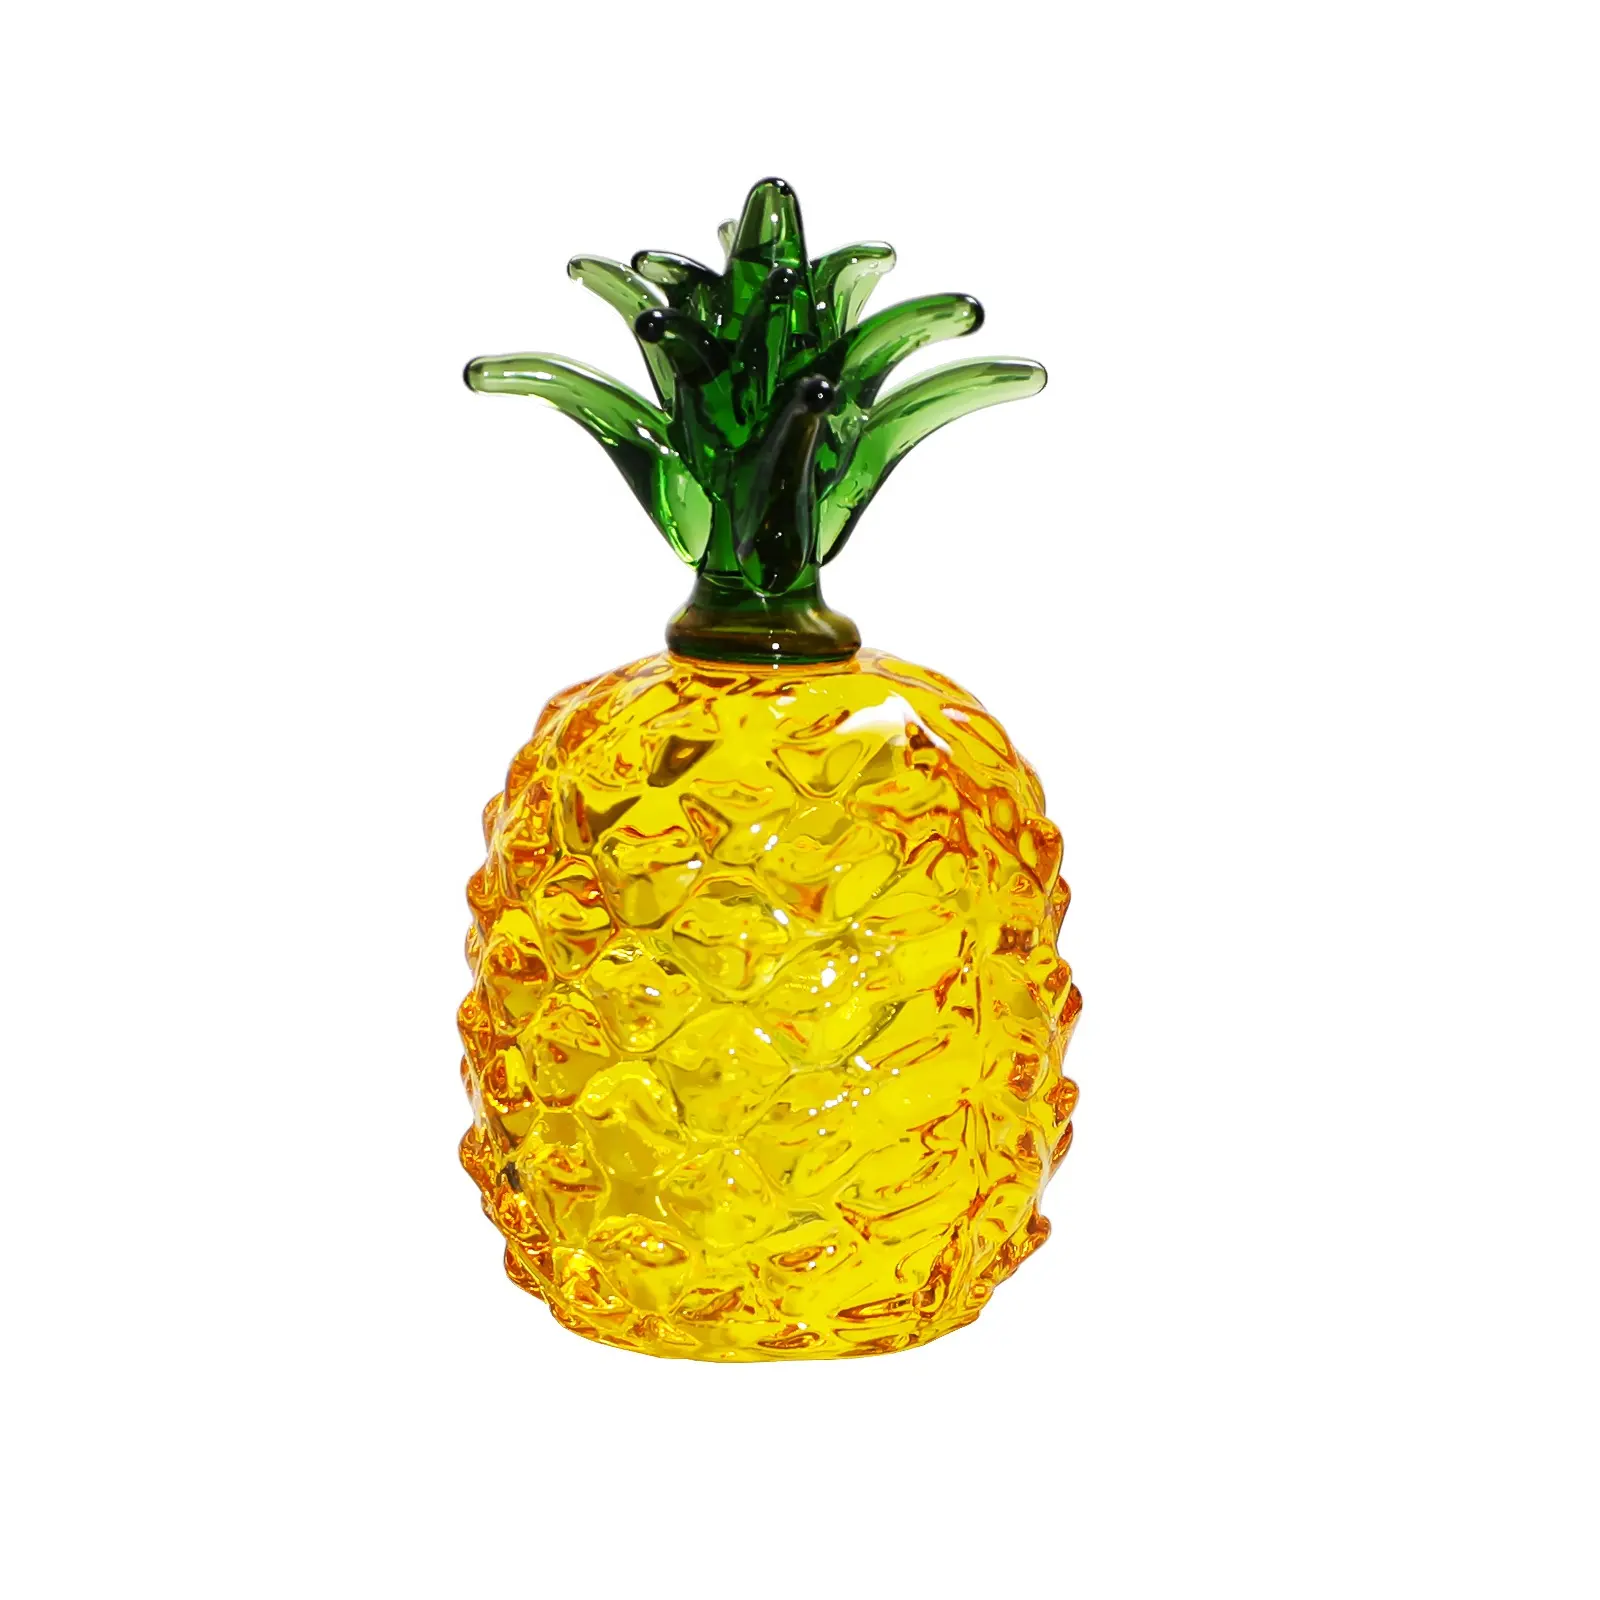 Crystal Yellow Pineapple Figurines Glass Fruit Paperweight Art Collection Handmade Craft Table